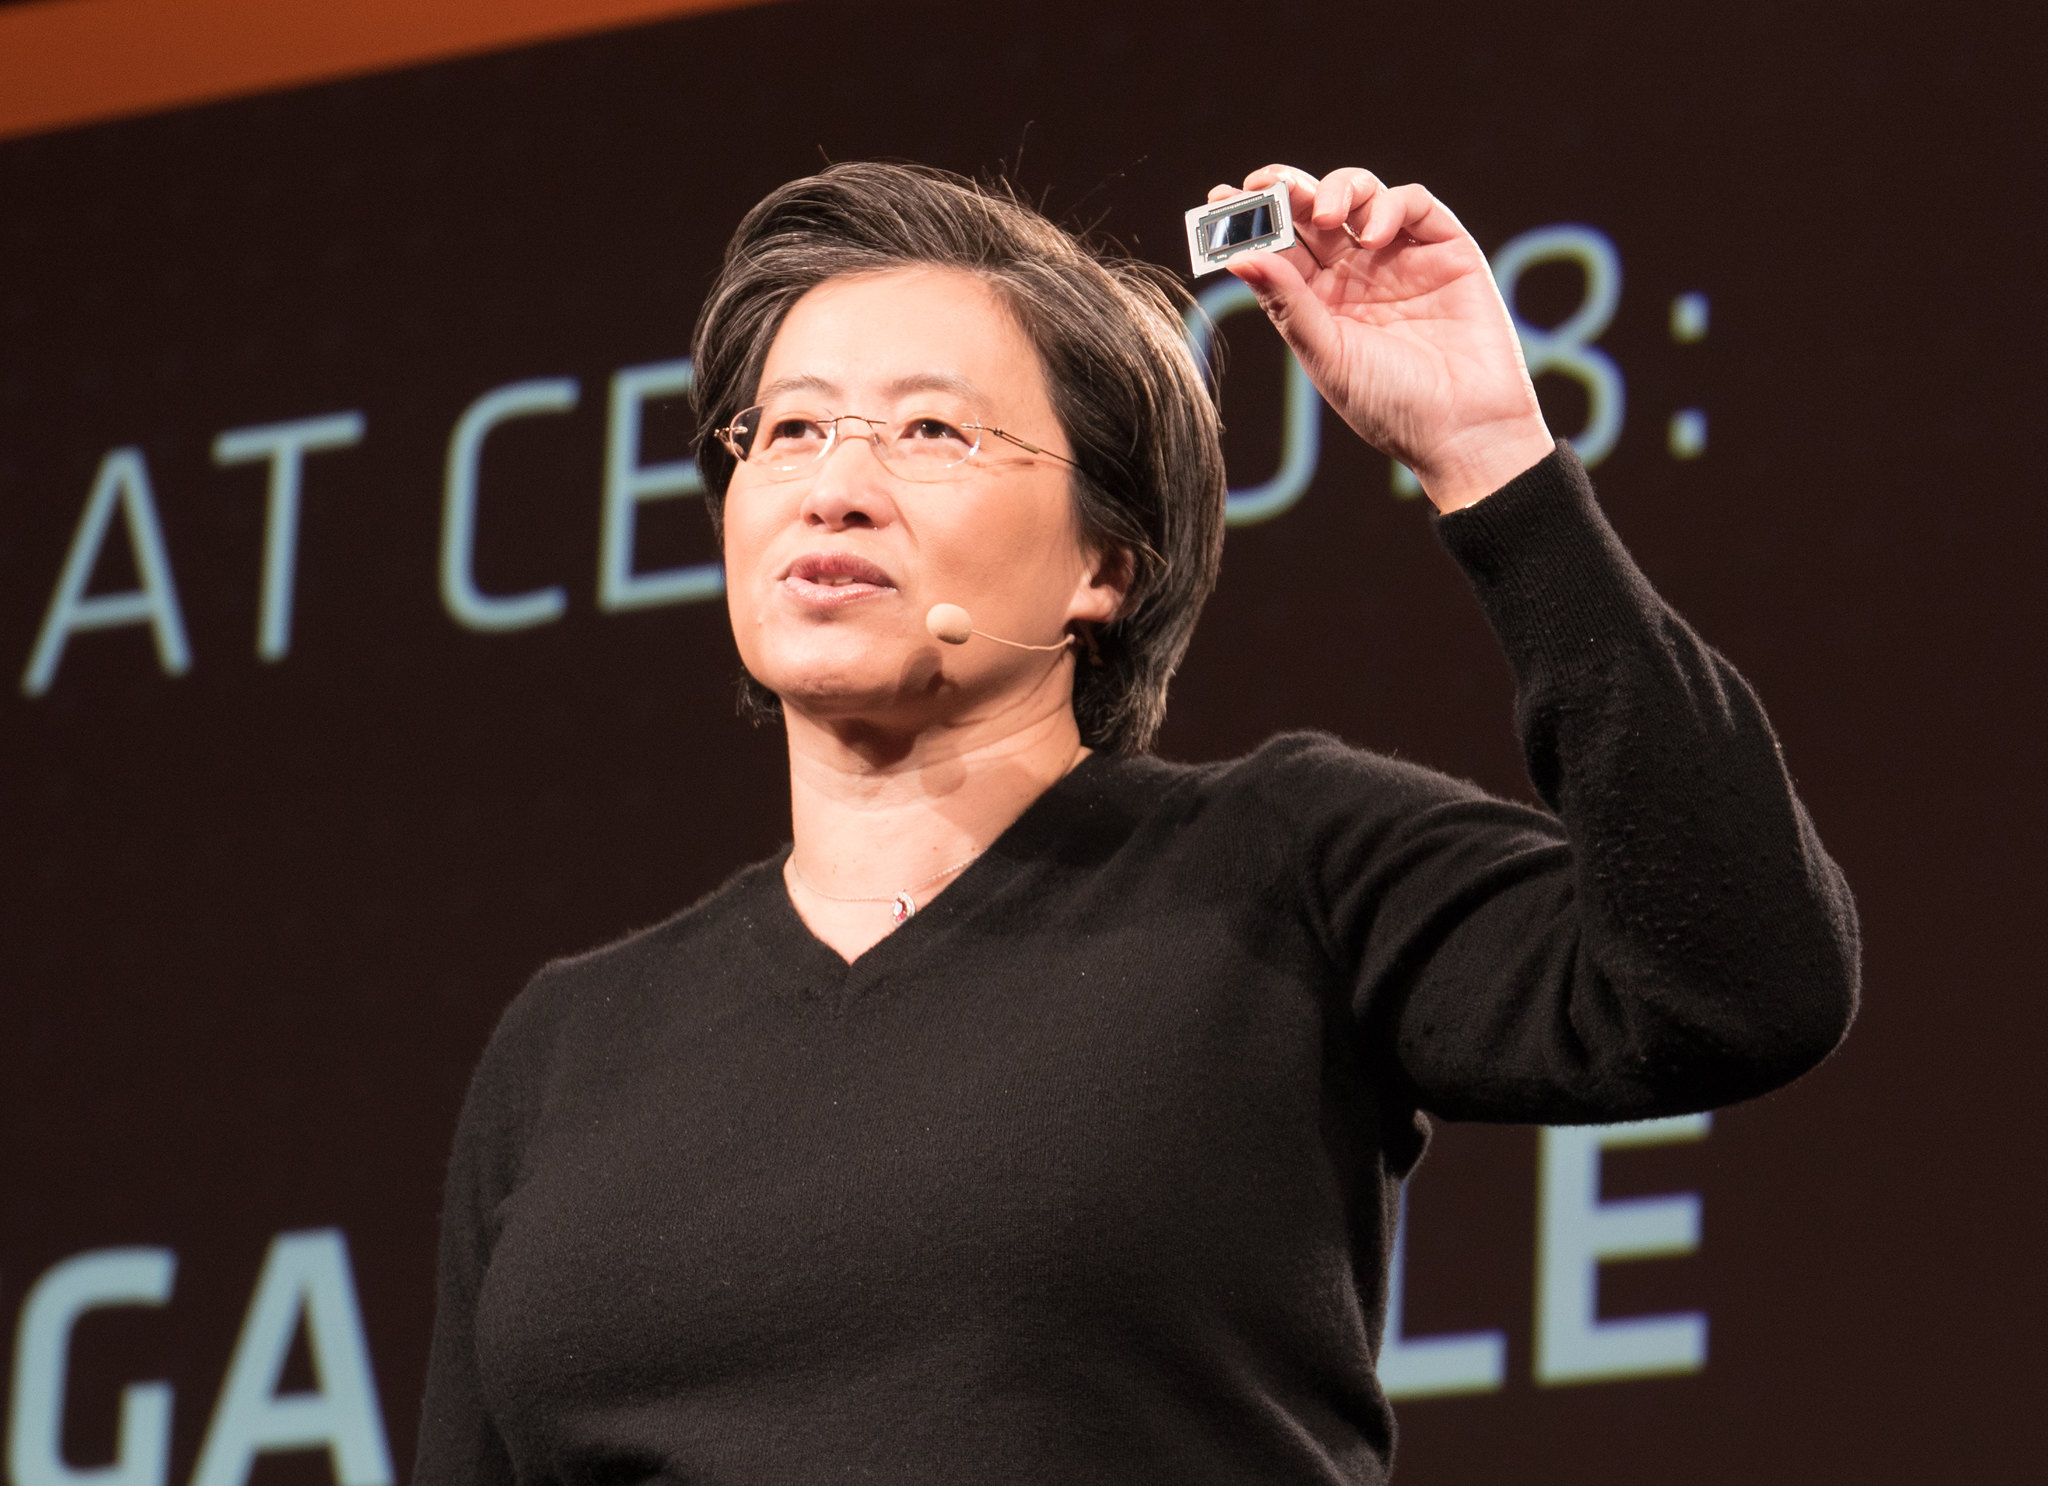 AMD’s stock falls after revised AI revenue outlook falls short of
expectations